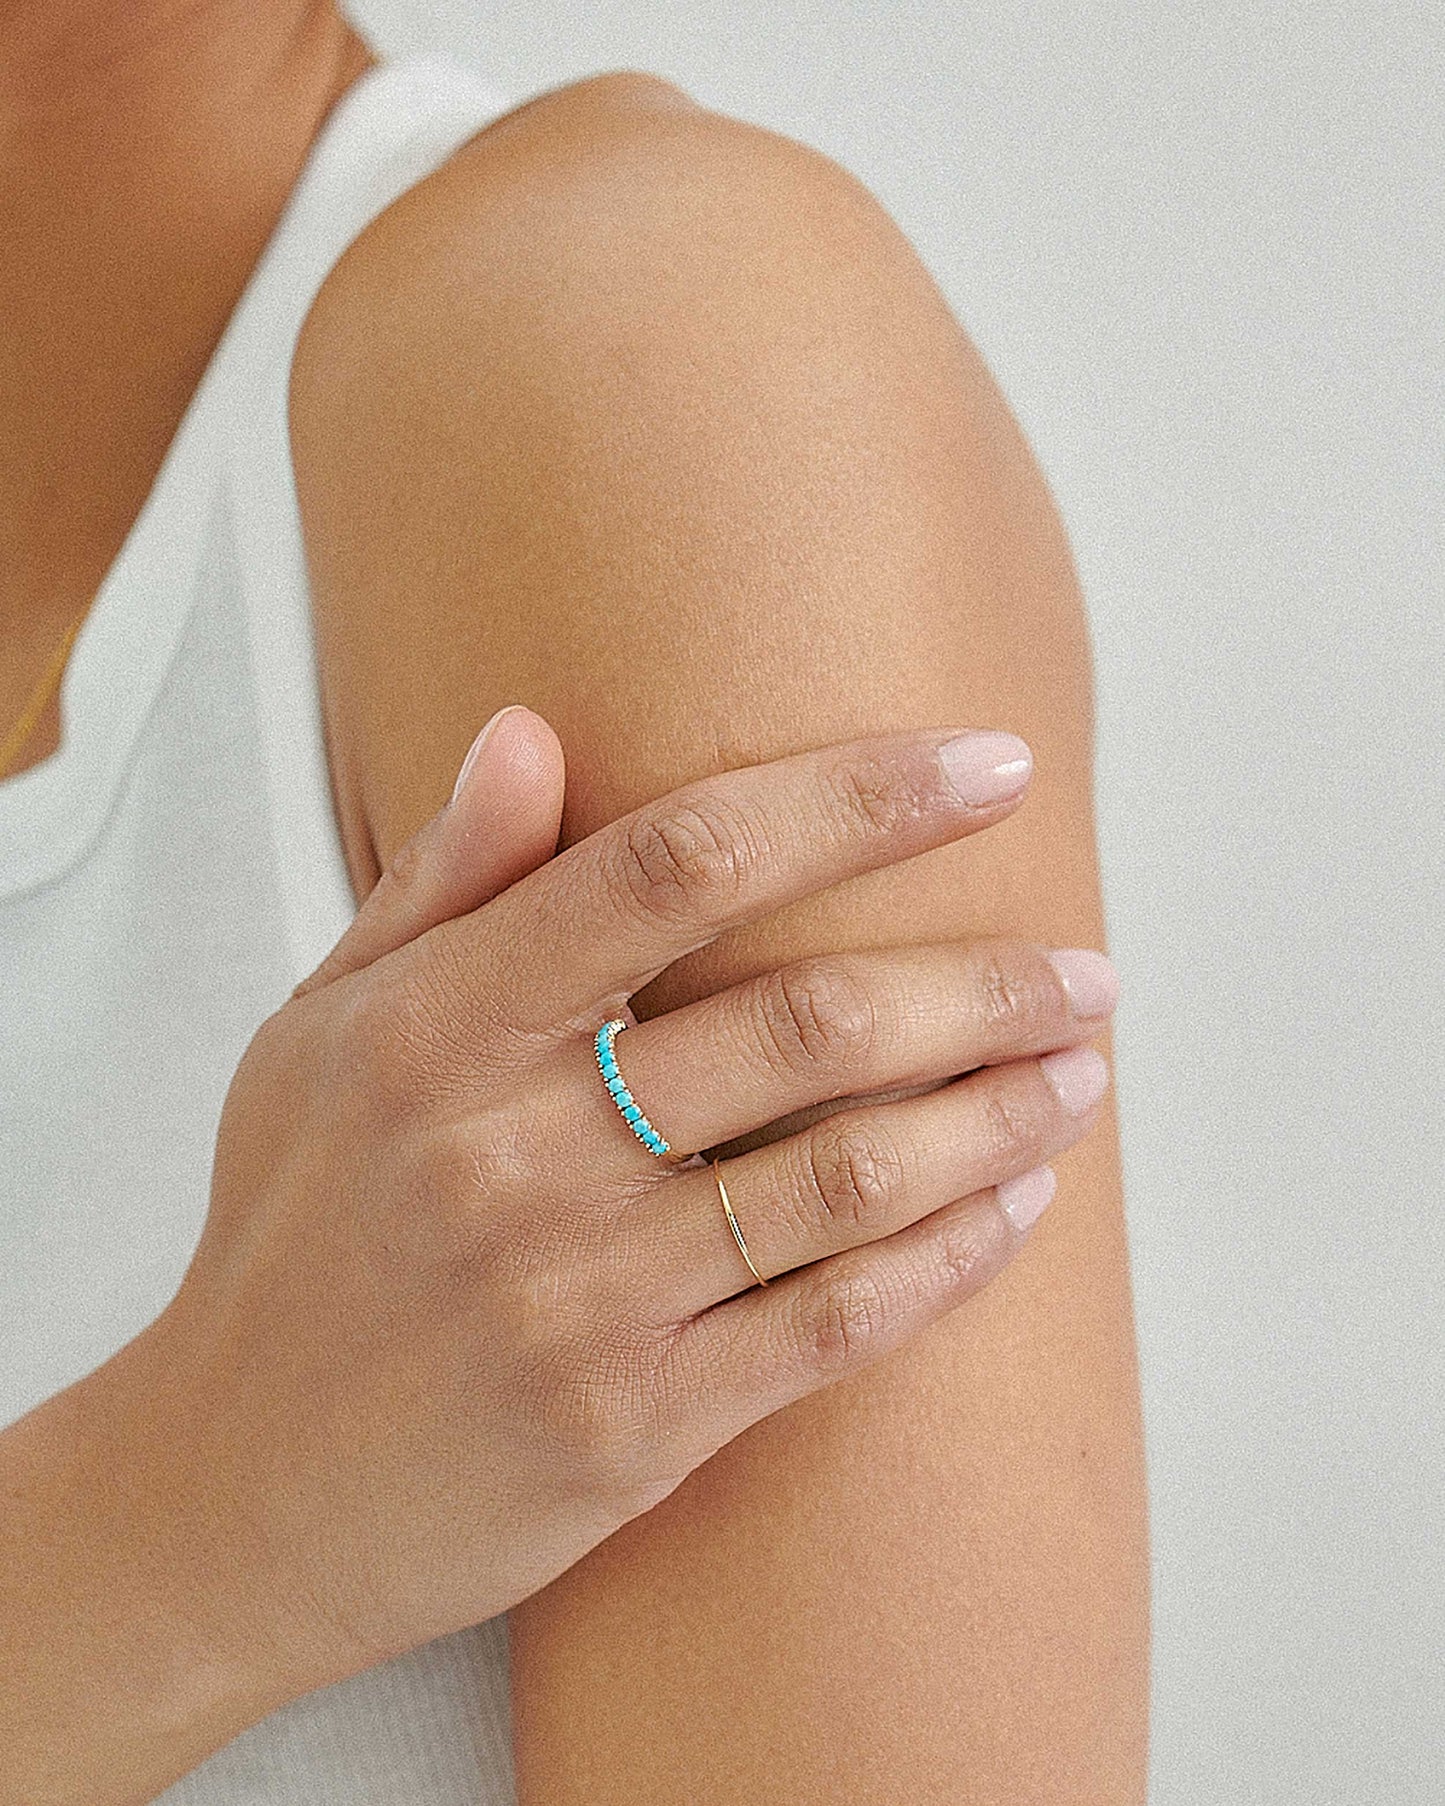 Turquoise Line Ring